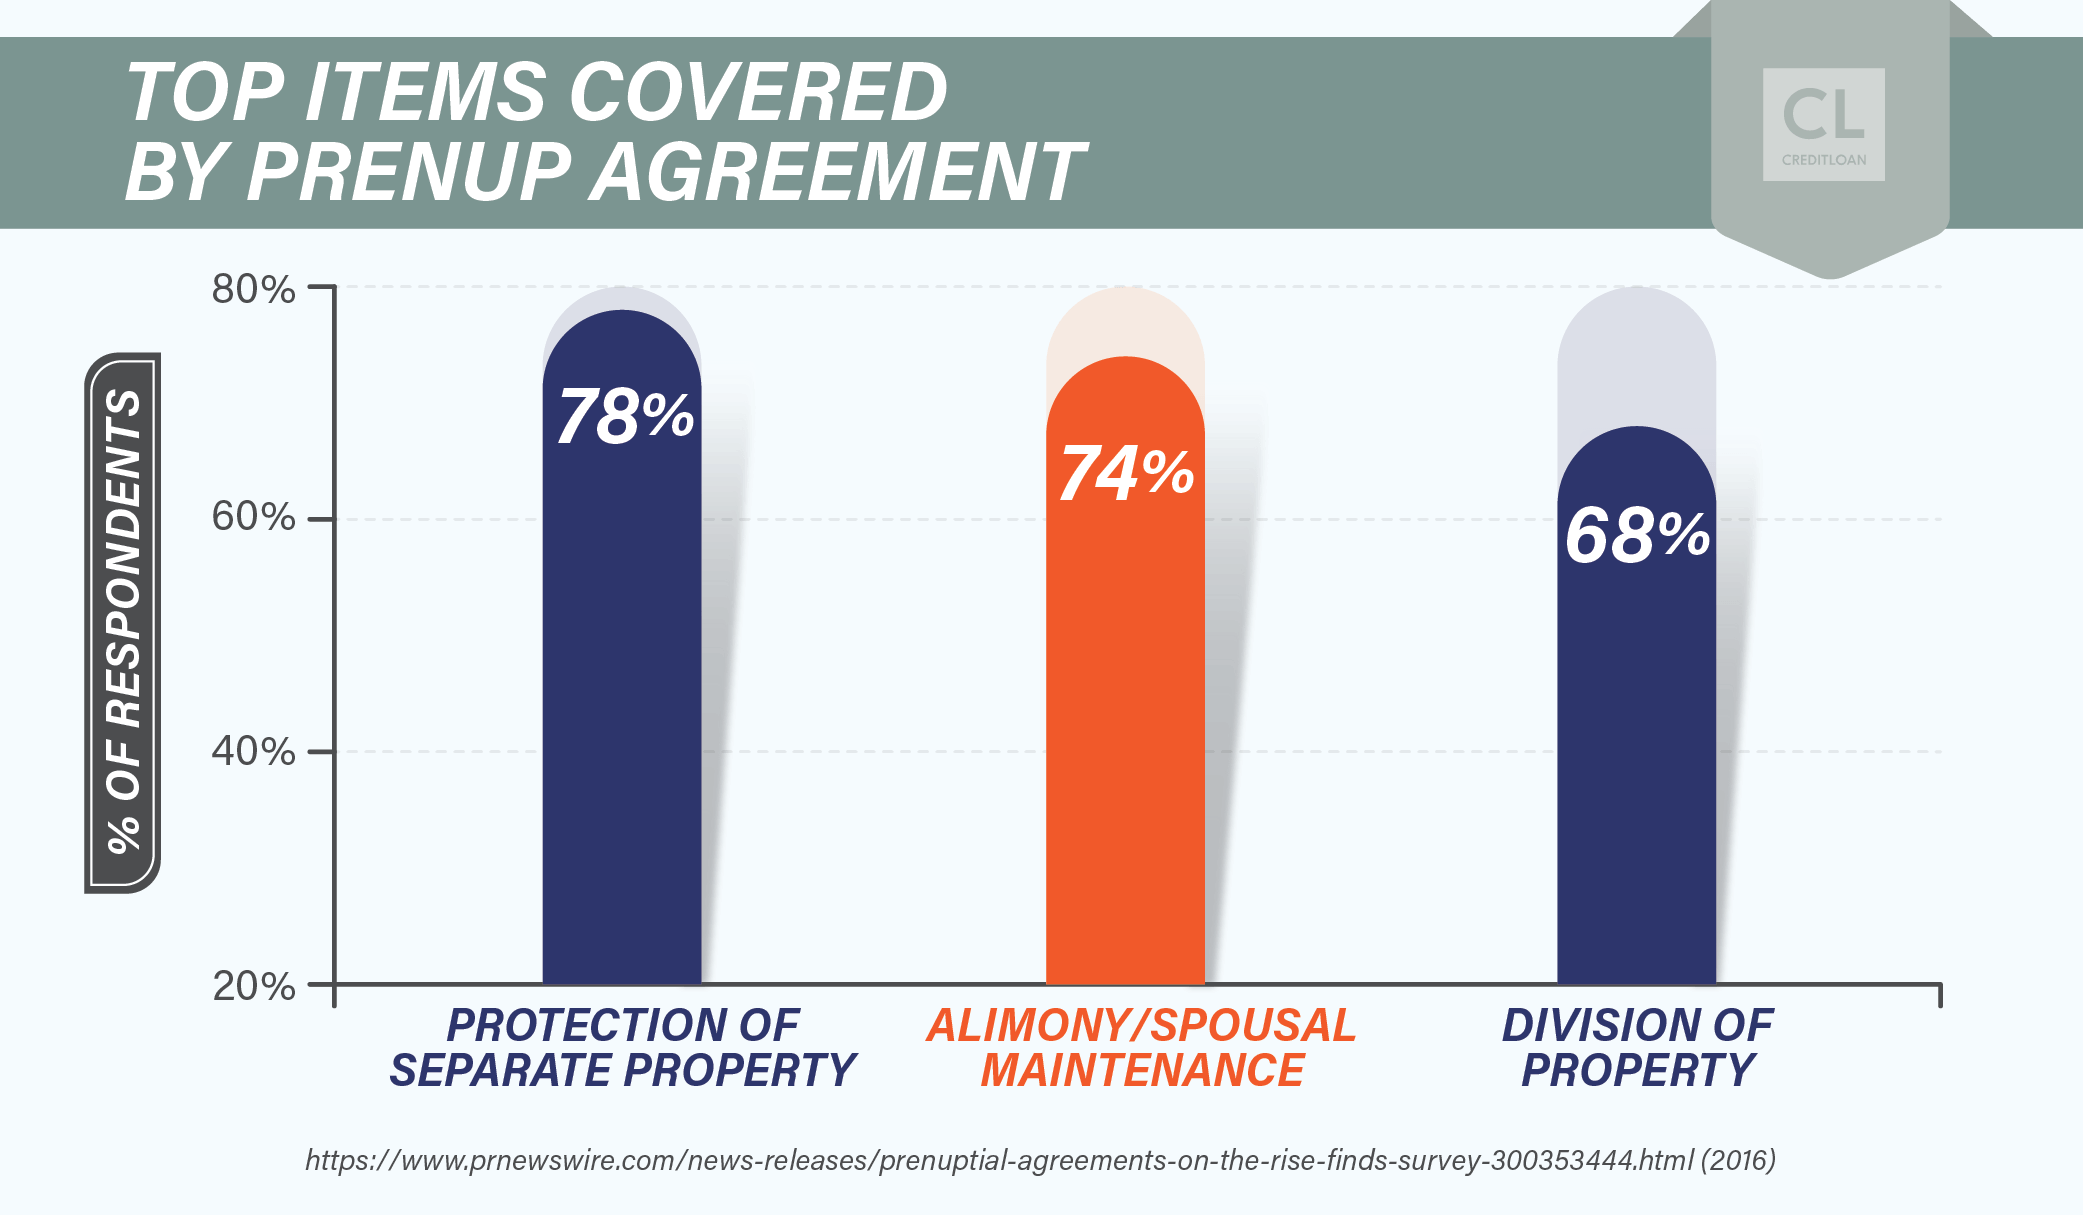 Top Items Covered By Prenup Agreement